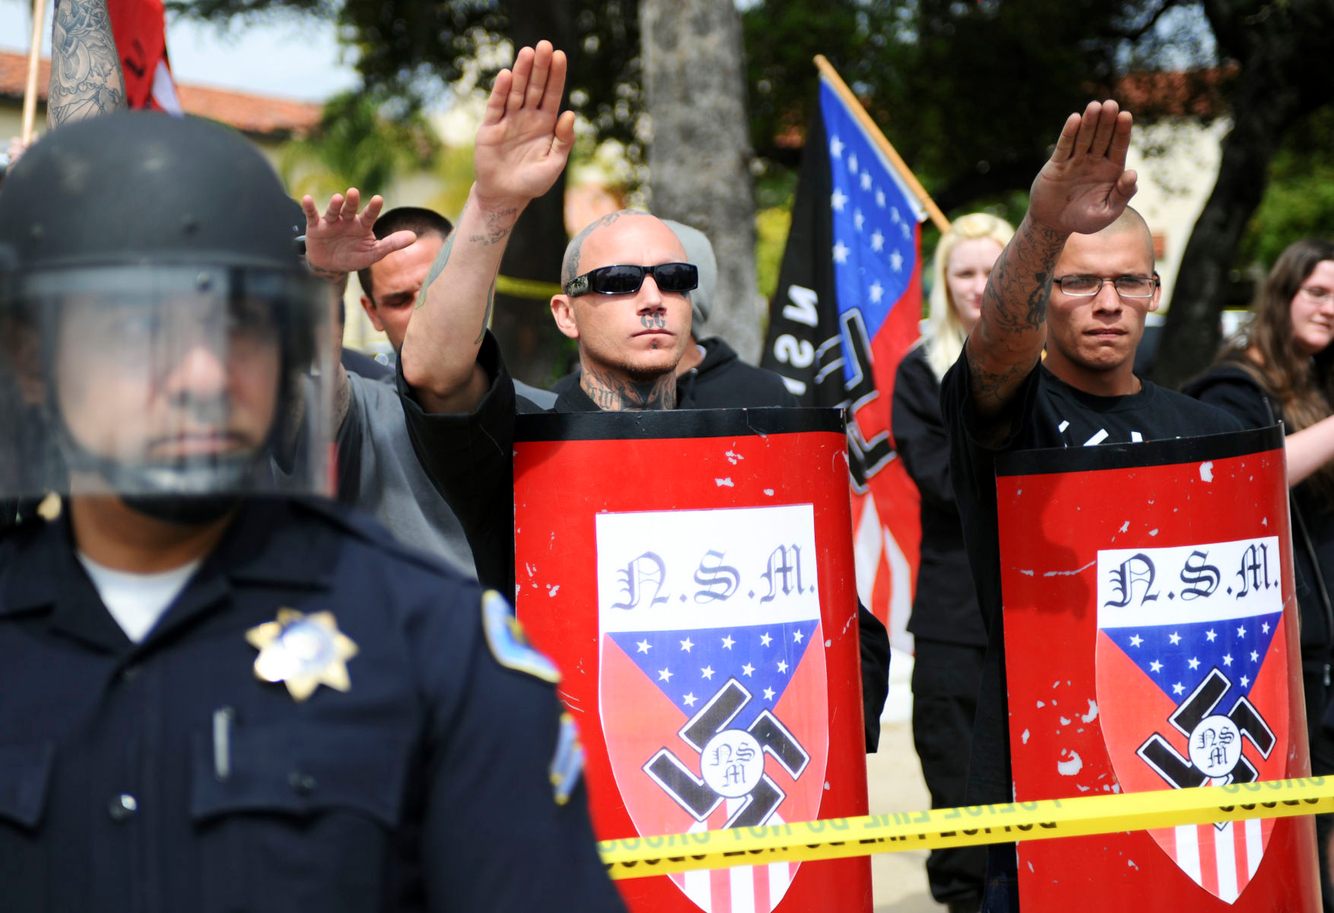 NAZI RALLY: Pro-Nazi supporters salute at a National Socialist Movement rally in Claremont, California